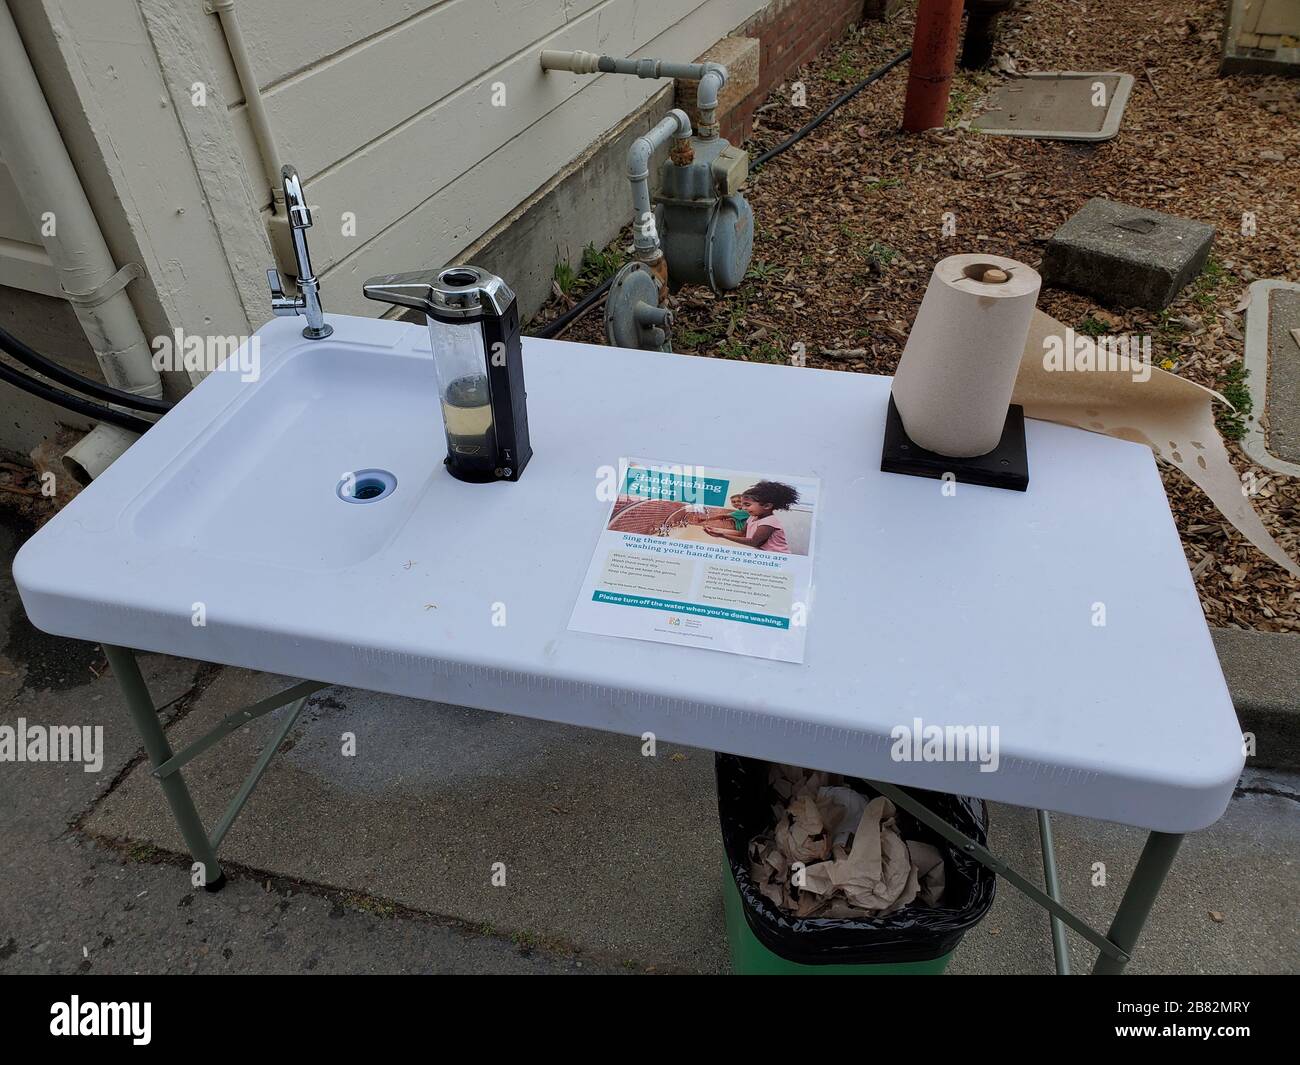 At the Bay Area Discovery Museum, a children's museum in Sausalito, California, a hand washing station is set up as part of an educational program about hand hygiene during an outbreak of COVID-19 coronavirus, Marin County, Sausalito, California, March 8, 2020. () Stock Photo